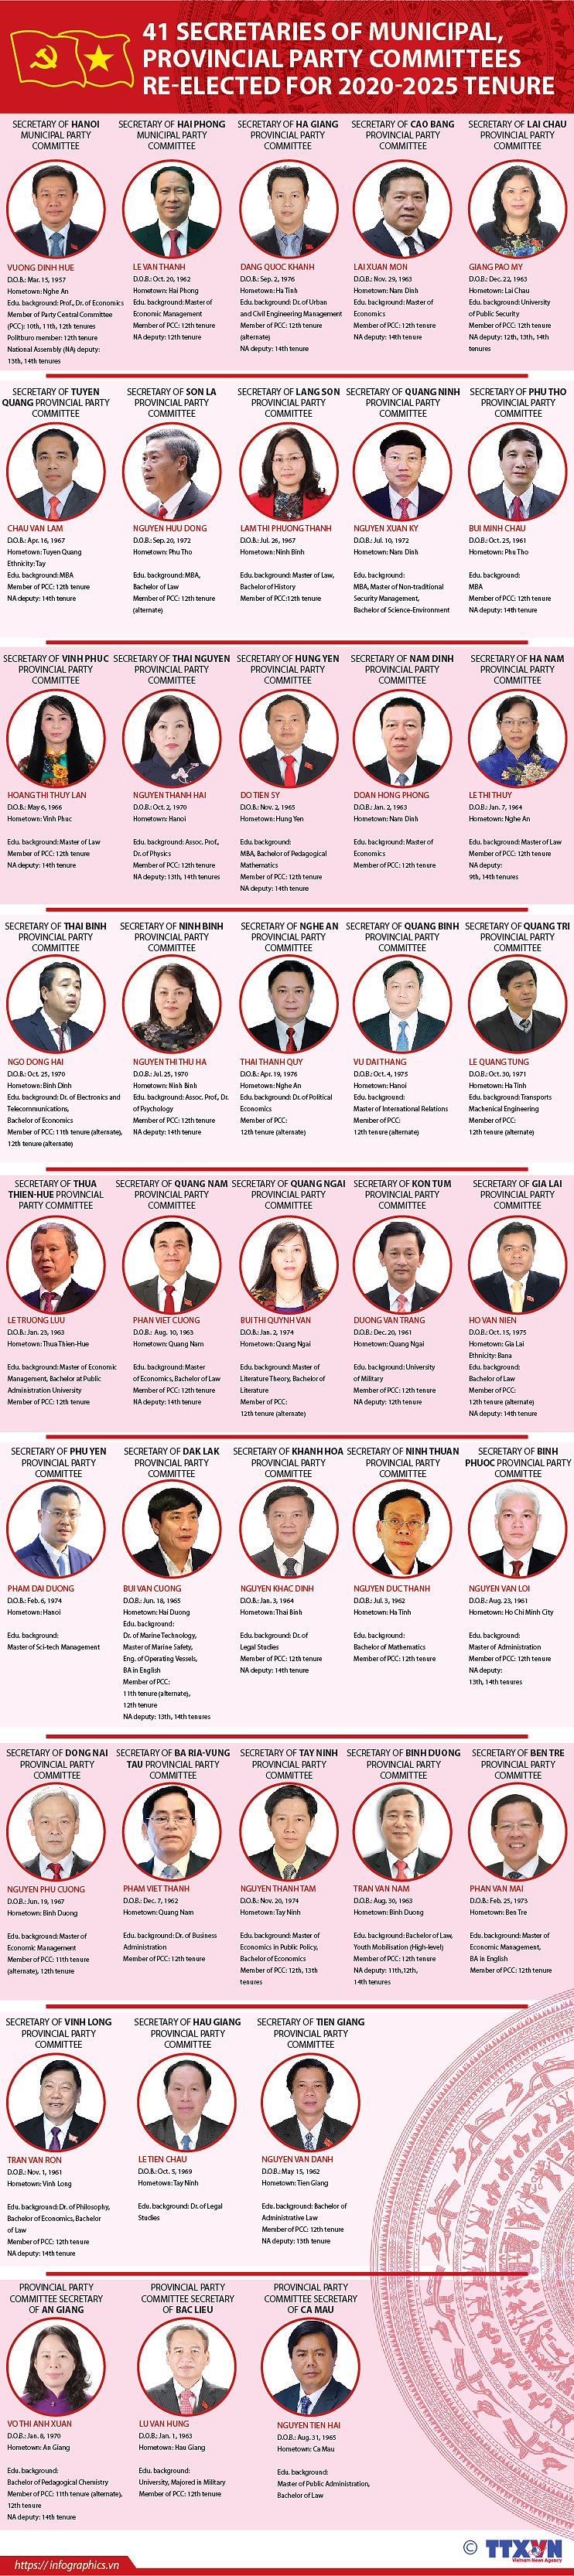 41 Secretaries of municipal, provincial Party Committees re-elected for 2020-2025 tenure hinh anh 1